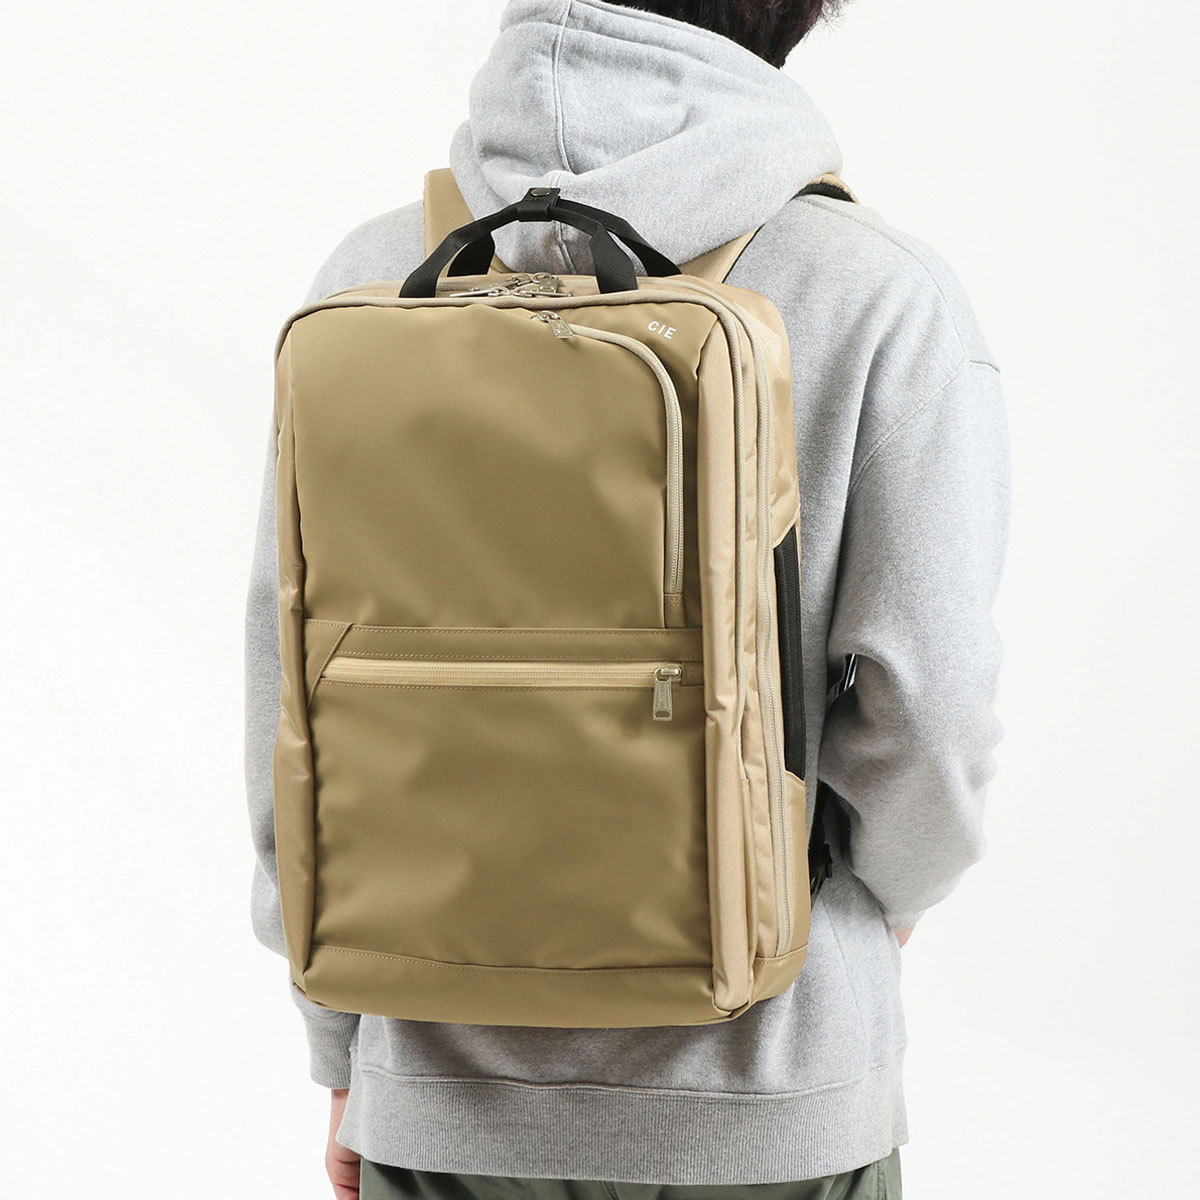 CIE リュック シー VARIOUS 2WAYBACKPACK - L ヴァリアス 2WAY